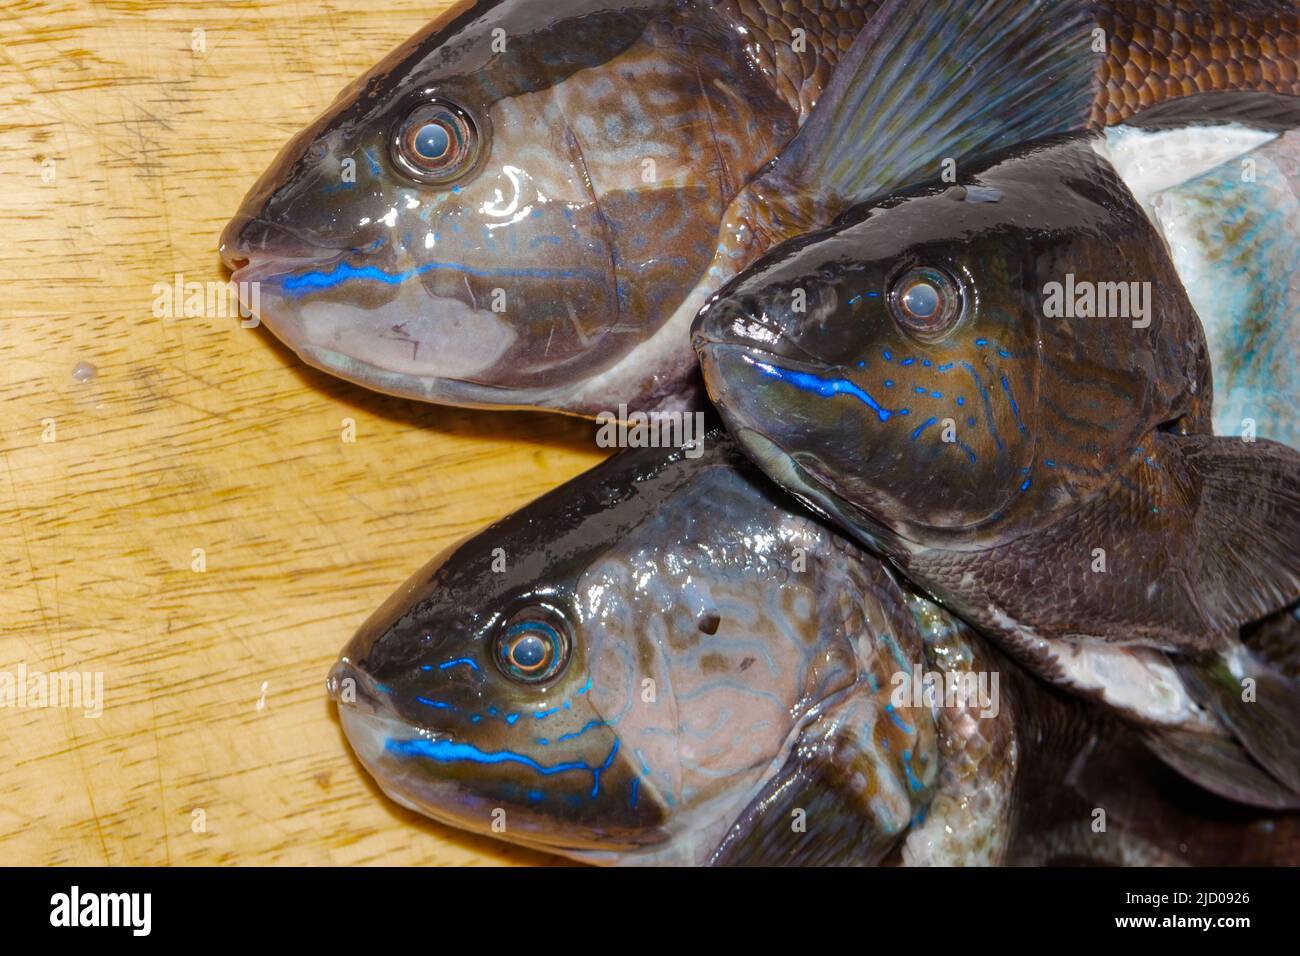 A look at life in New Zealand. Butterfish (Odax Pullus) Caught